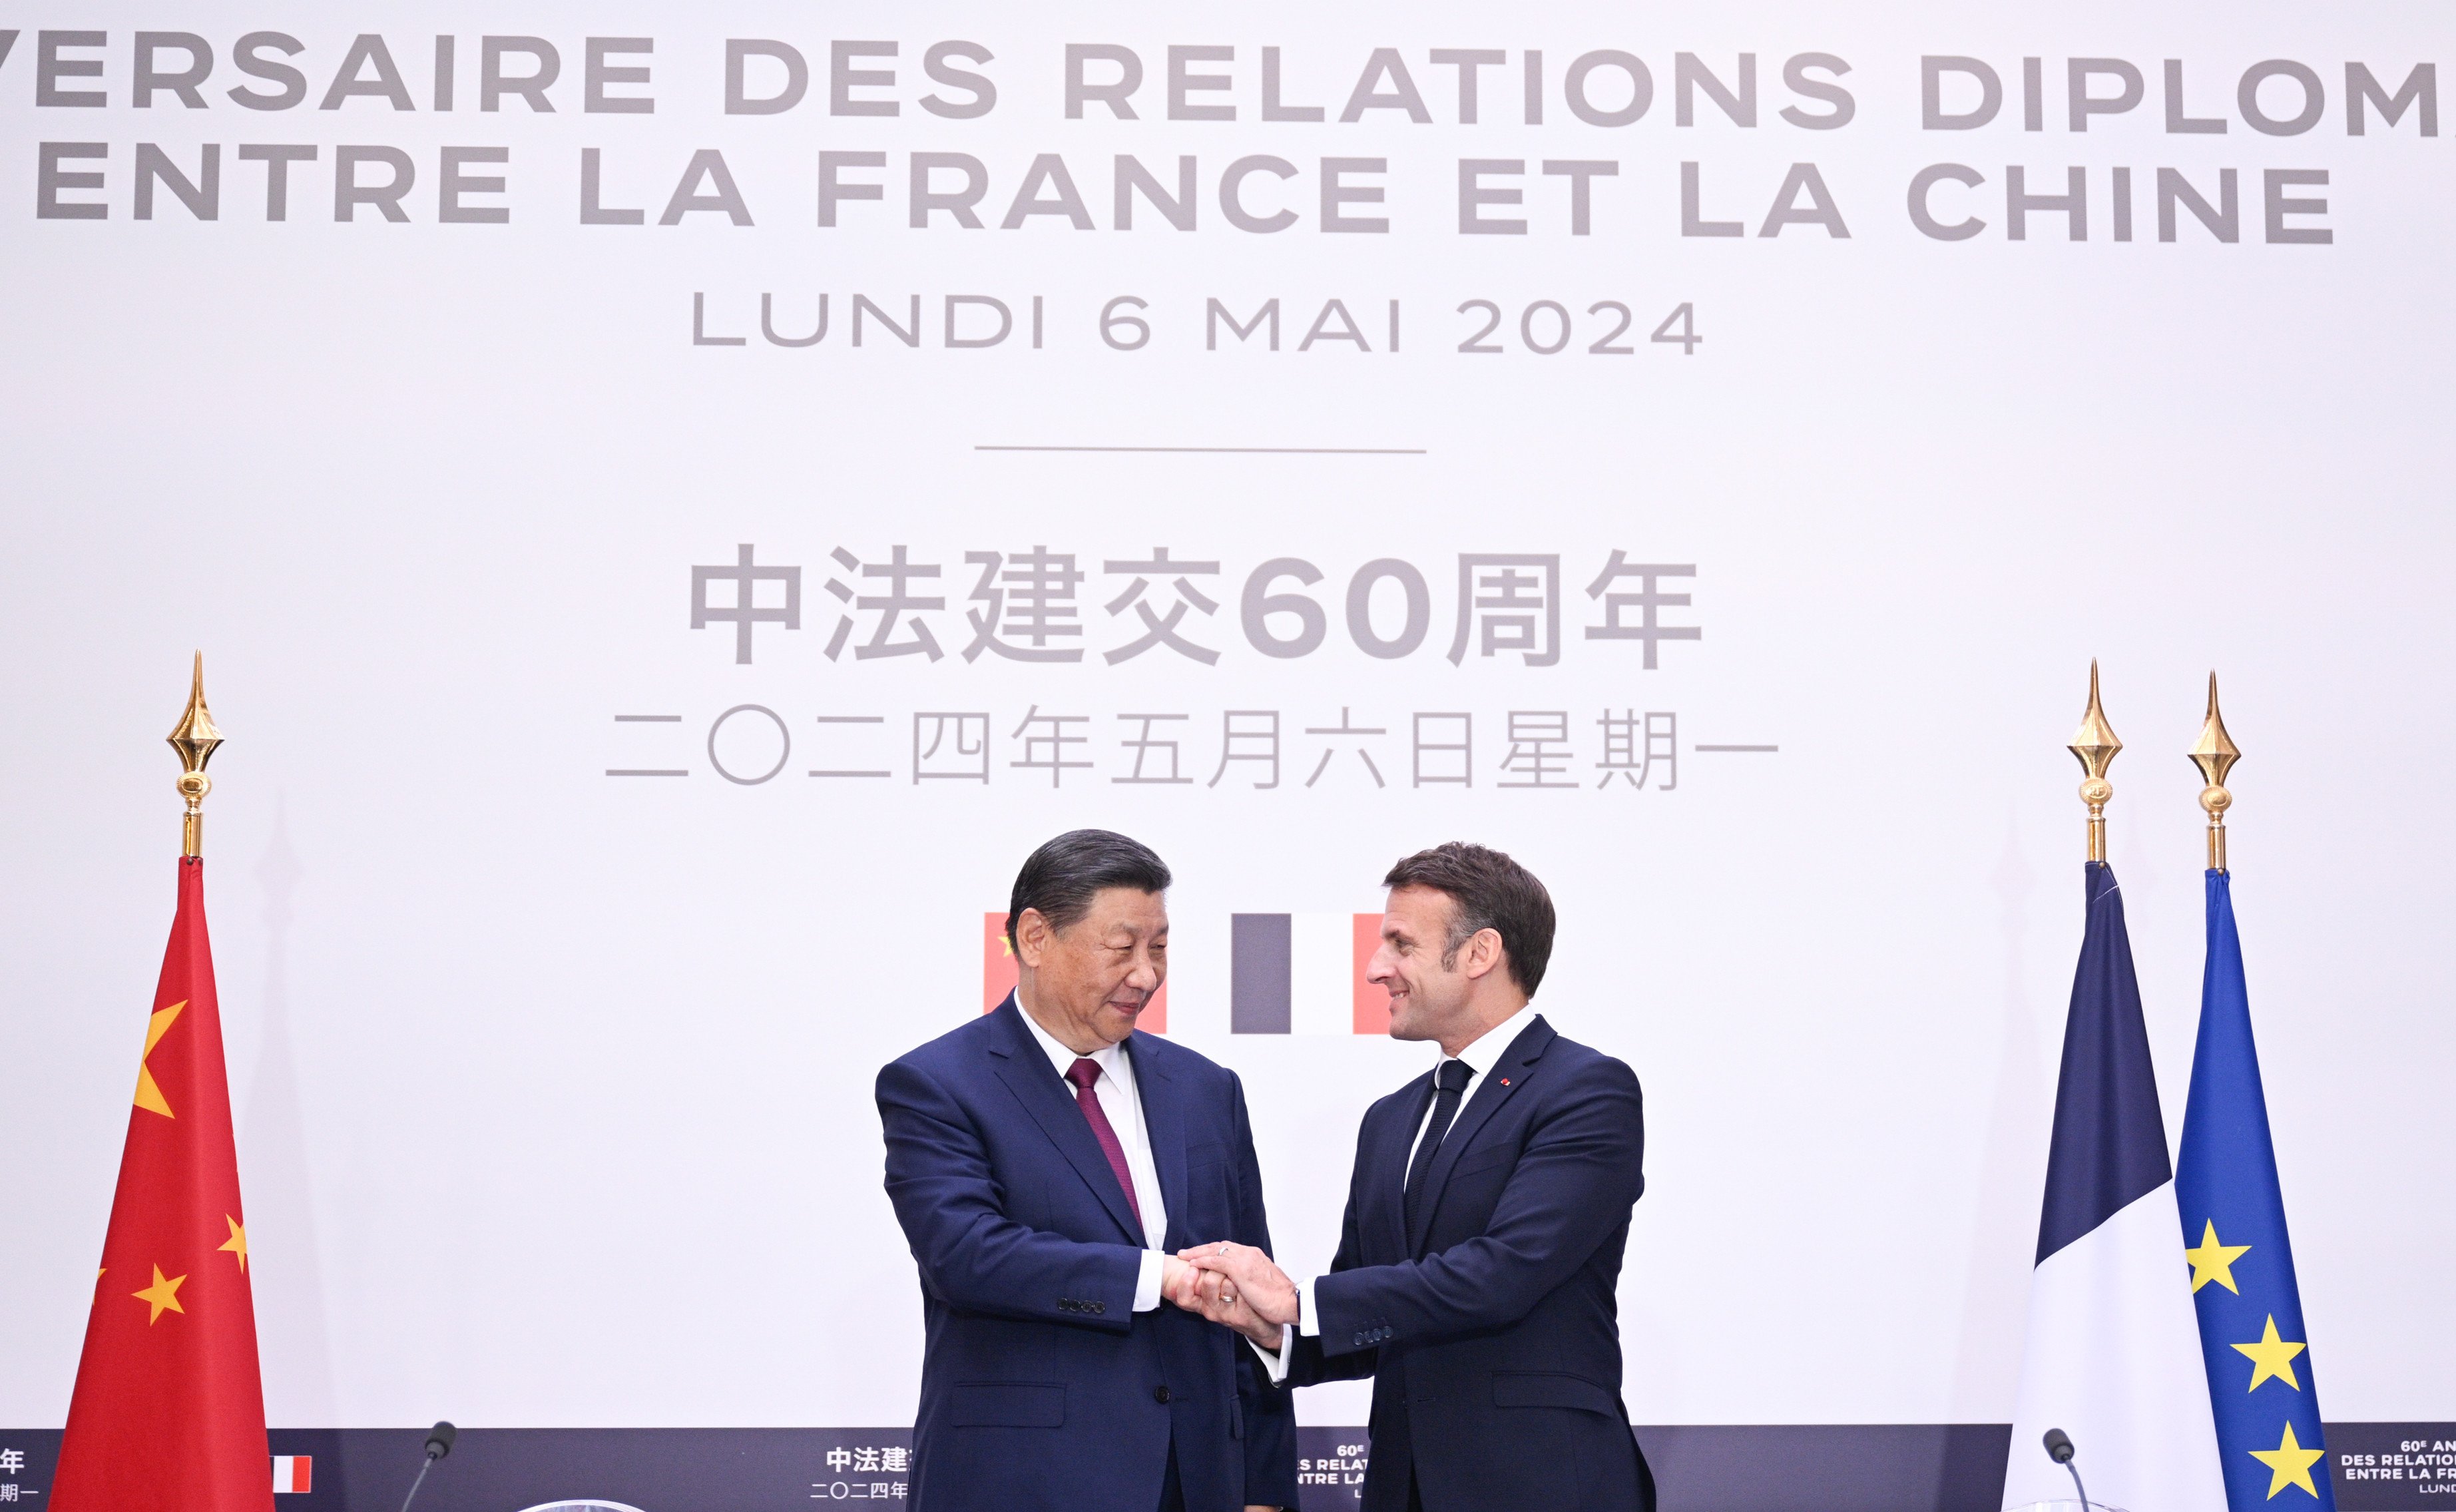 Chinese President Xi Jinping and his French counterpart, Emmanuel Macron, at a press meeting to note 60 years of Sino-French diplomatic relations, in Paris, France, on May 6. Photo: Xinhua